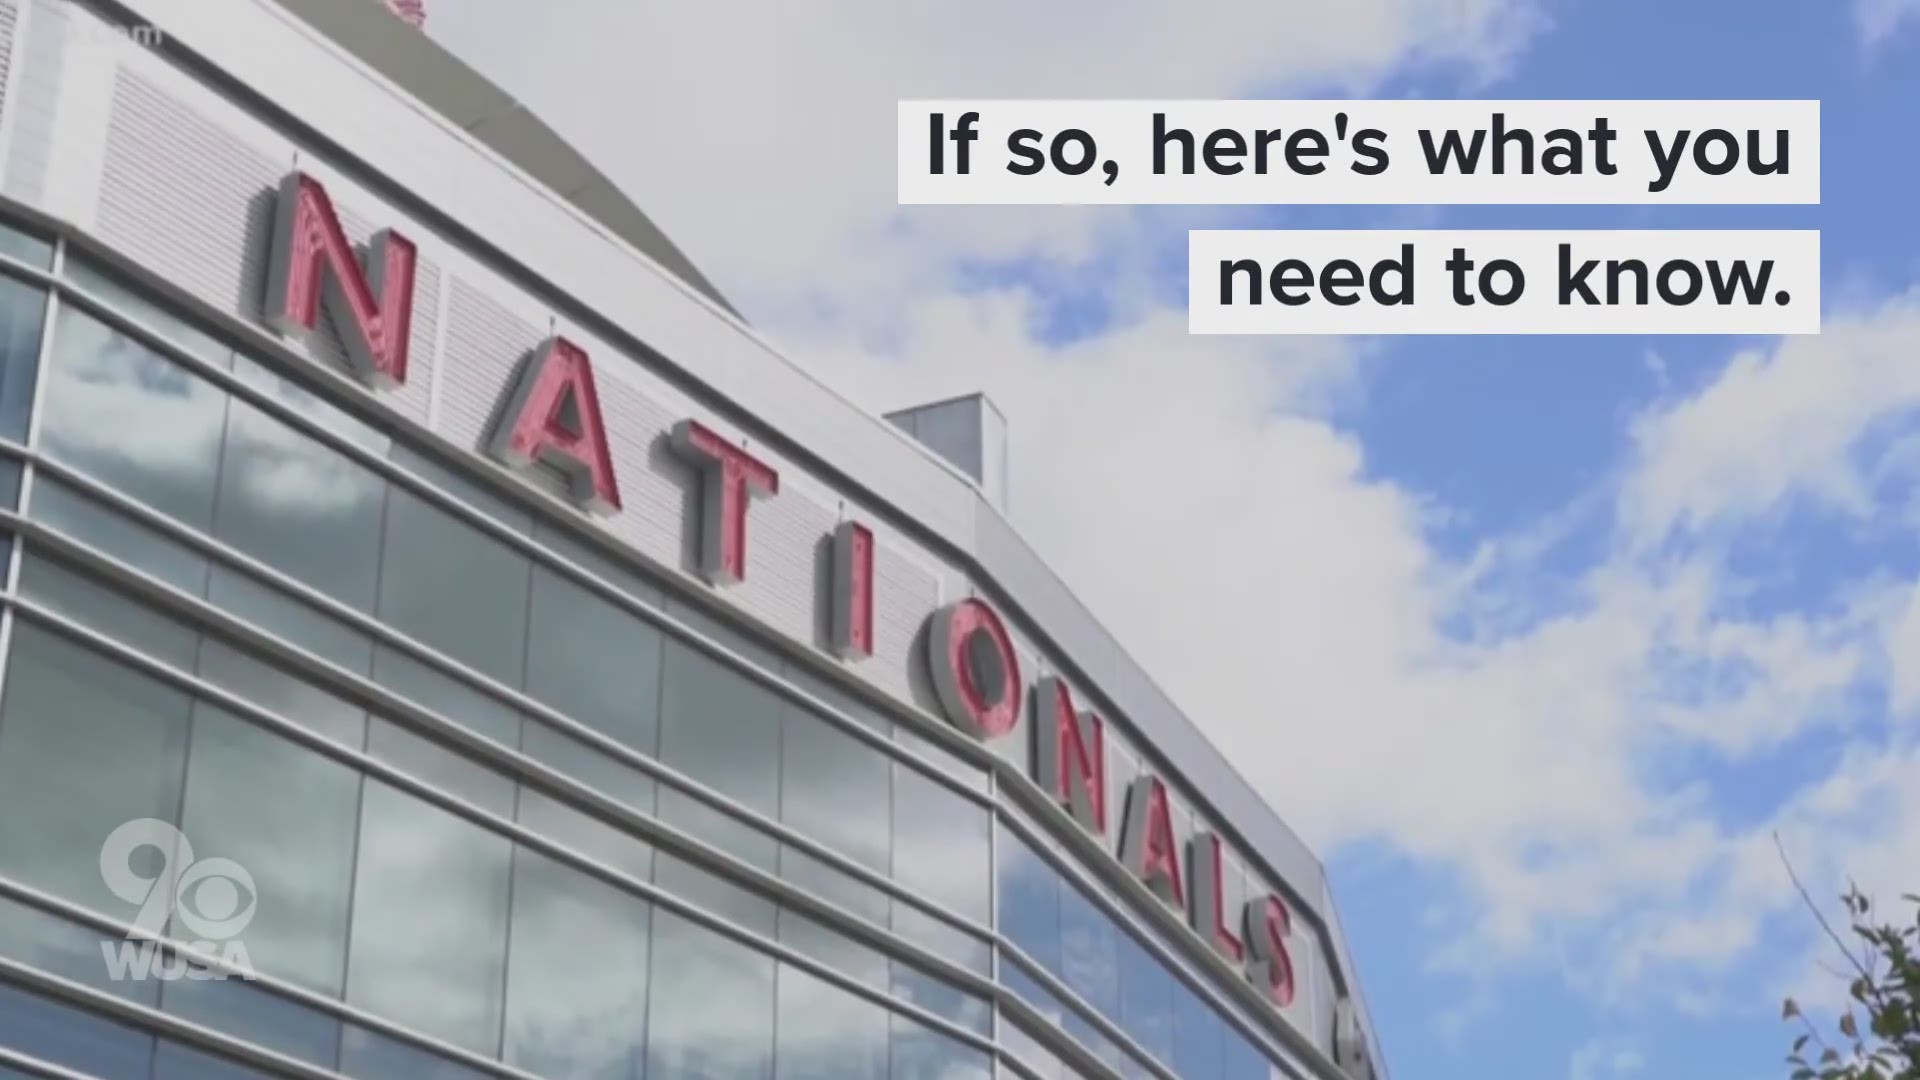 All gates at Nationals Park open at 4 p.m. for Game 5.